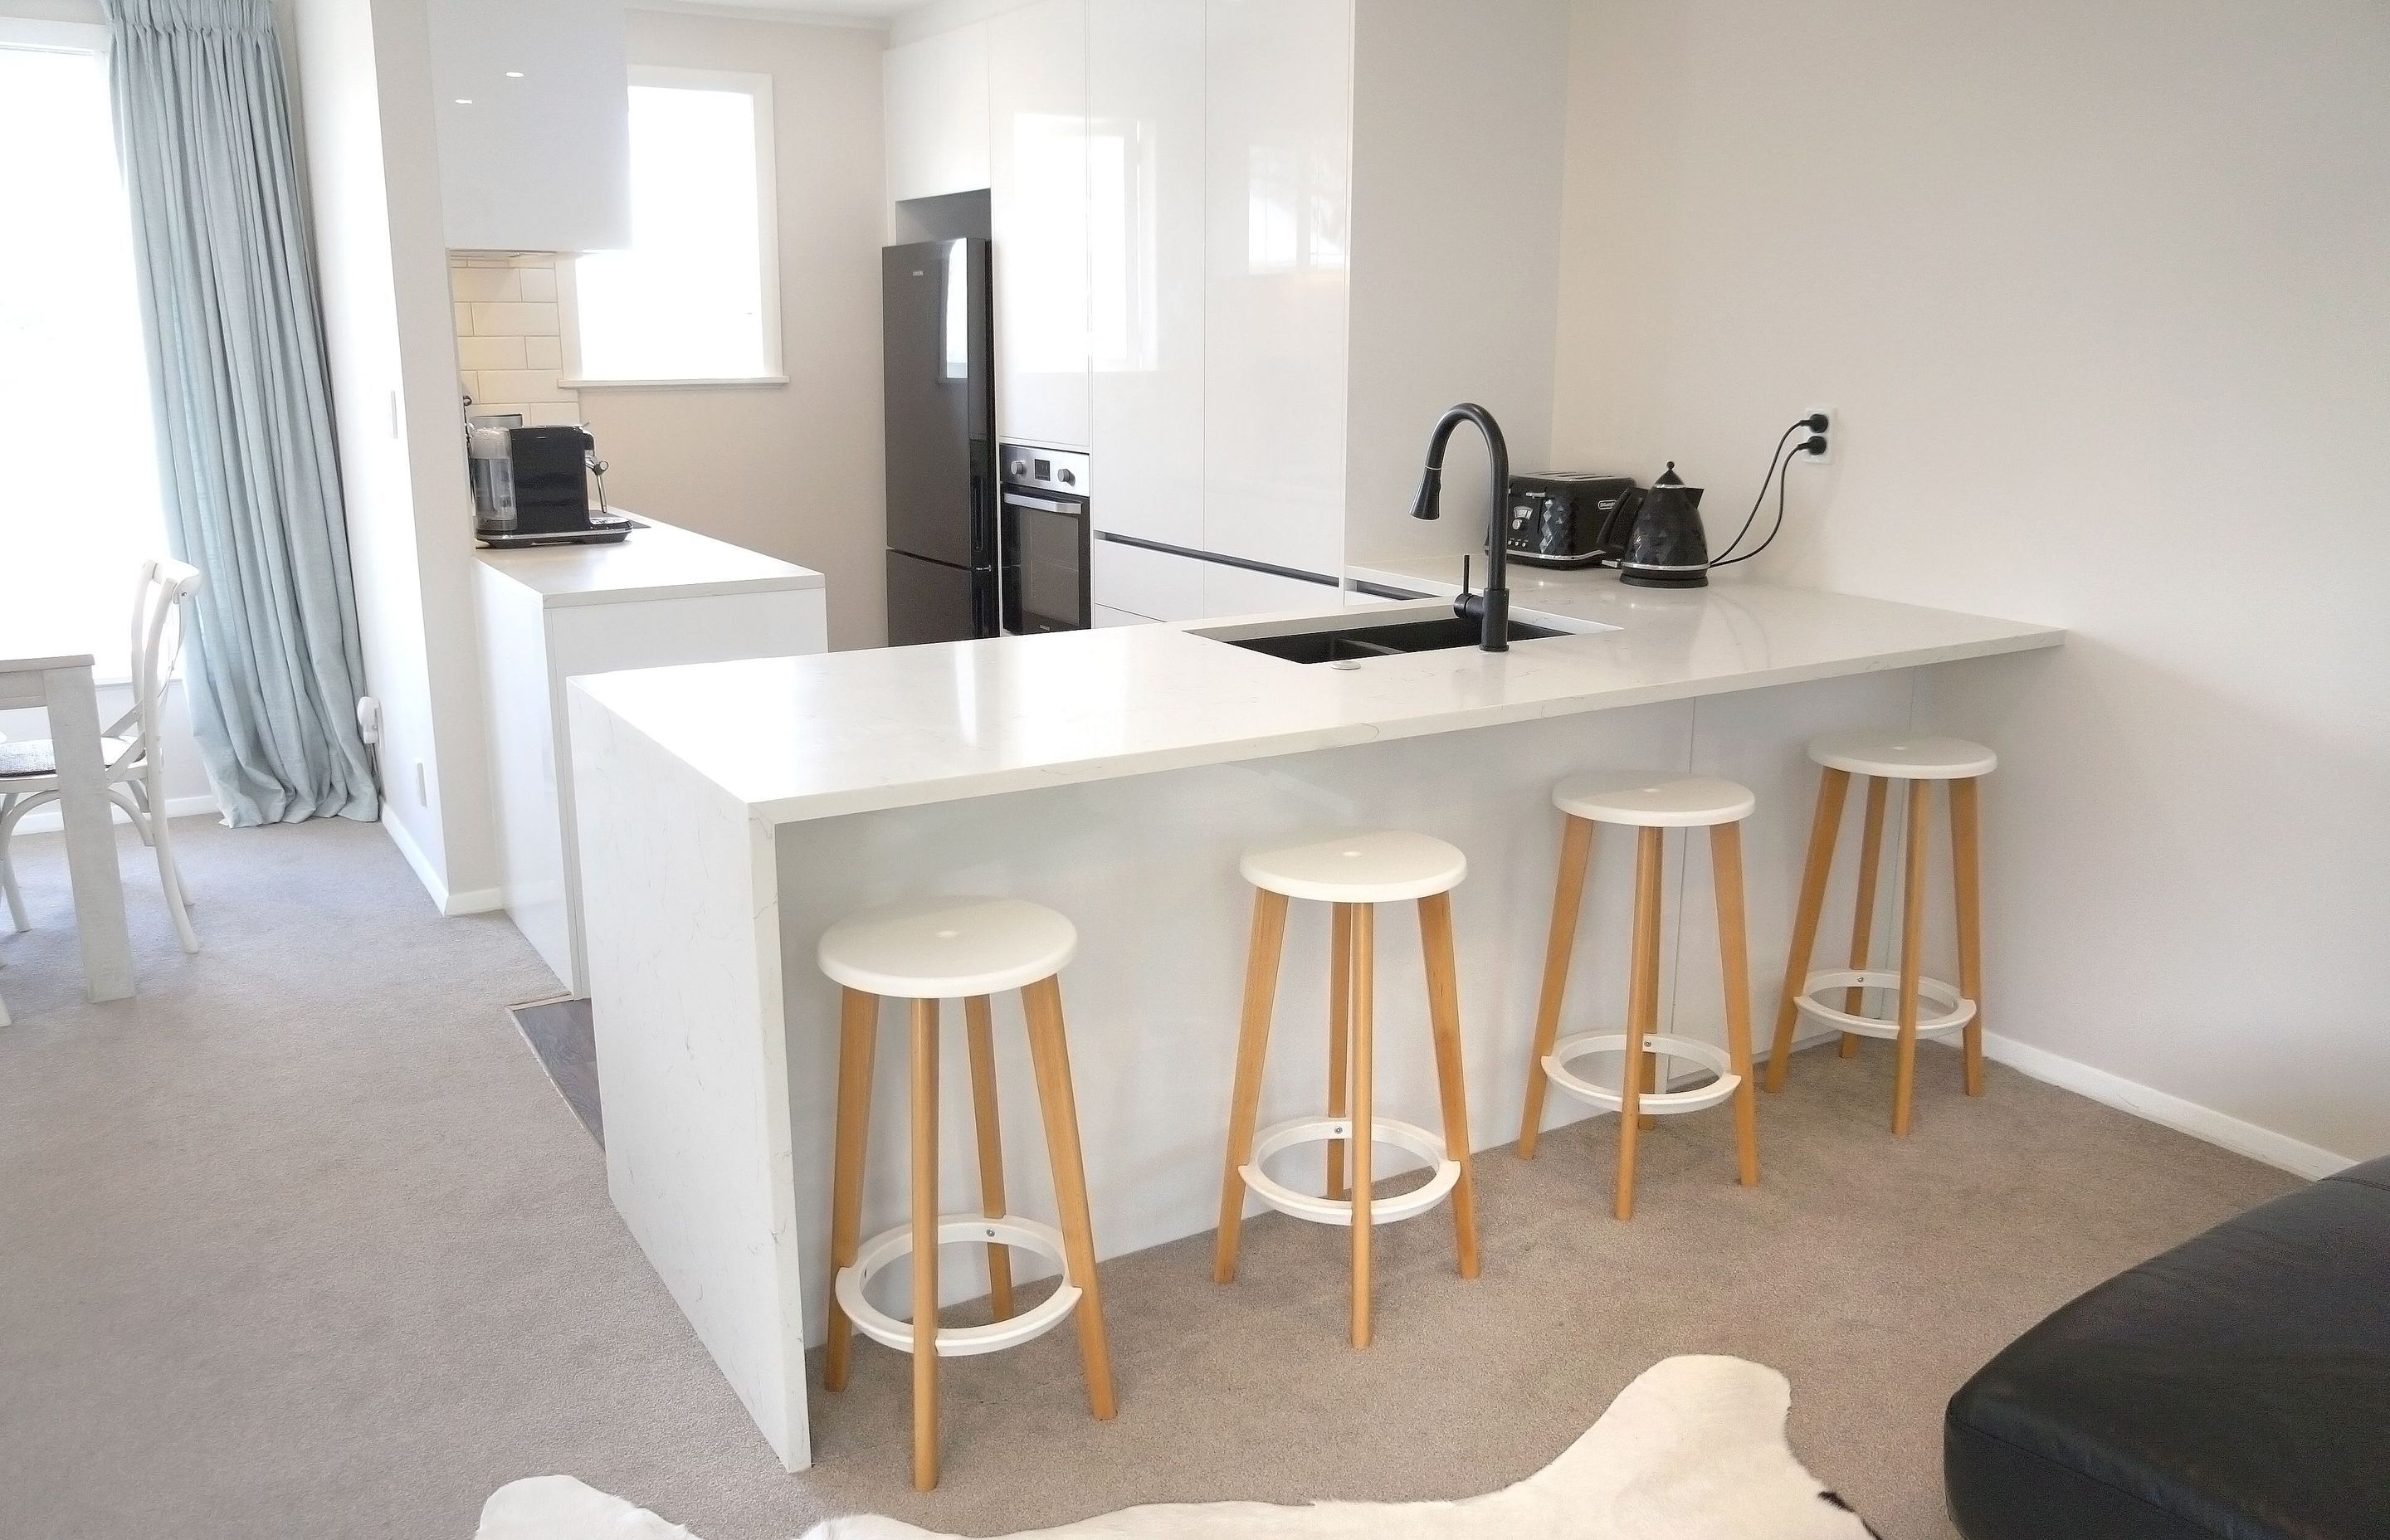 AFTER we demolished the wall we were able to create a small island which gave our clients additional storage, counter space and an area to install their sink